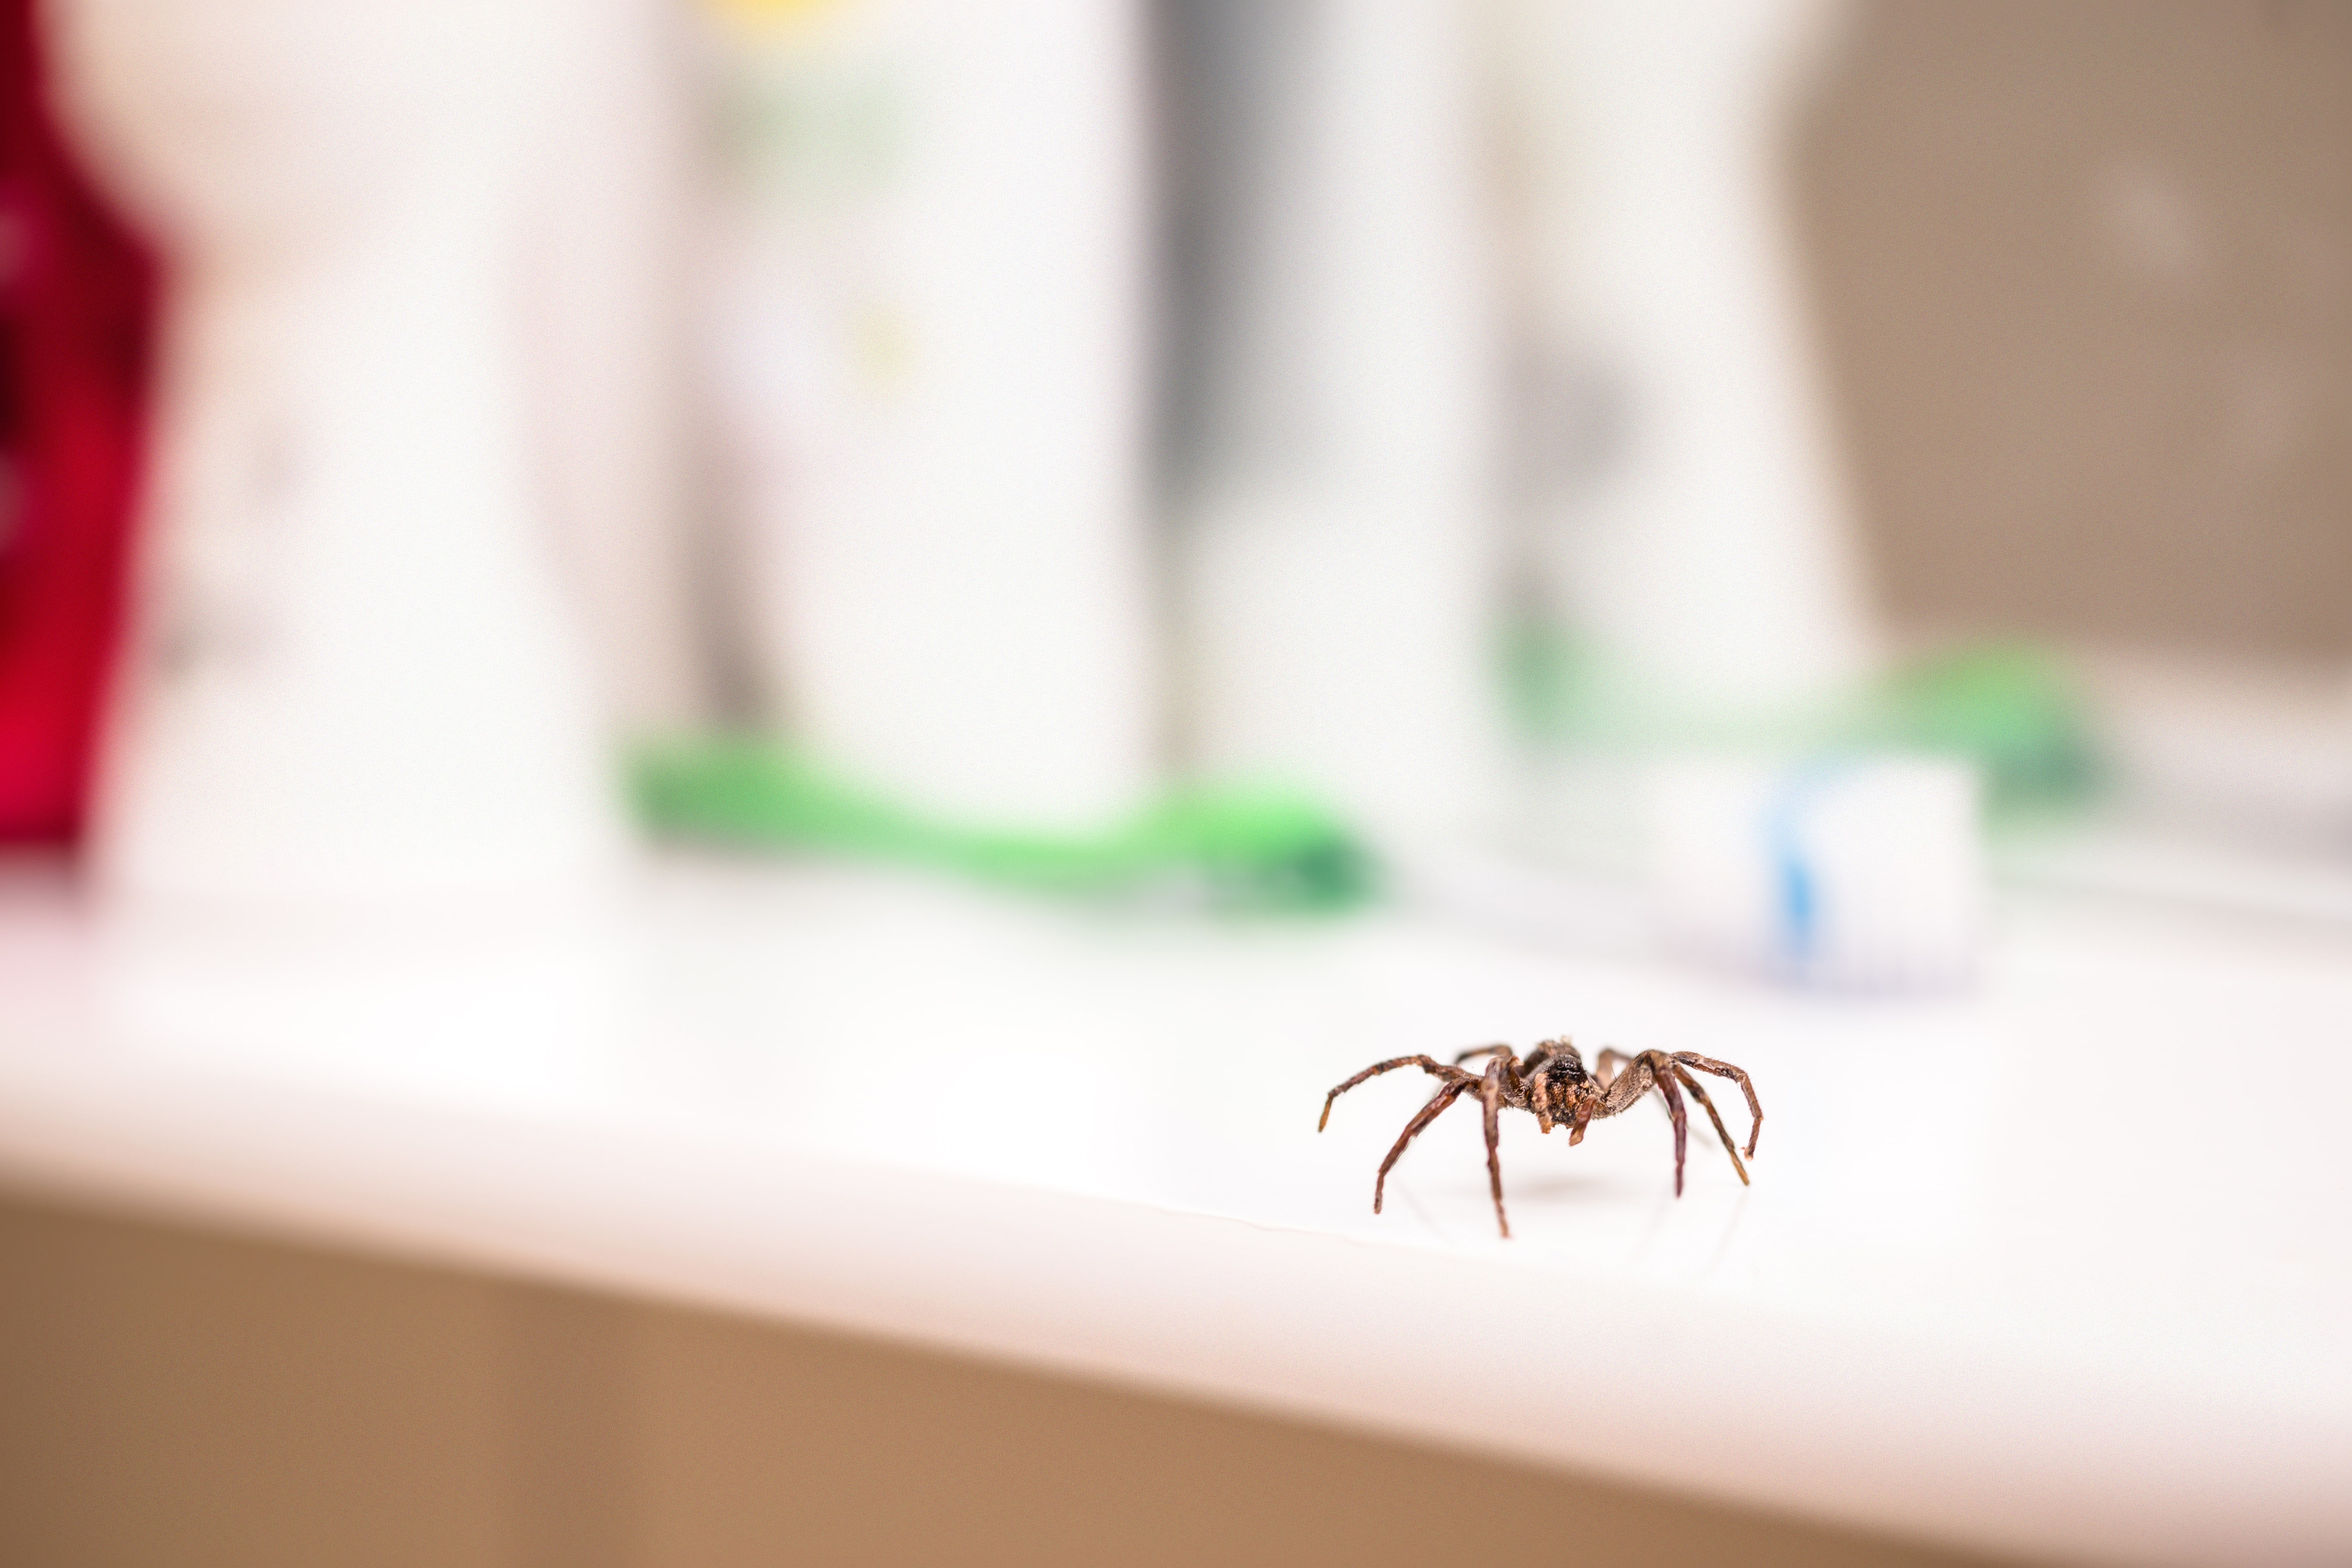 A spider scurrying along a countertop in the house.